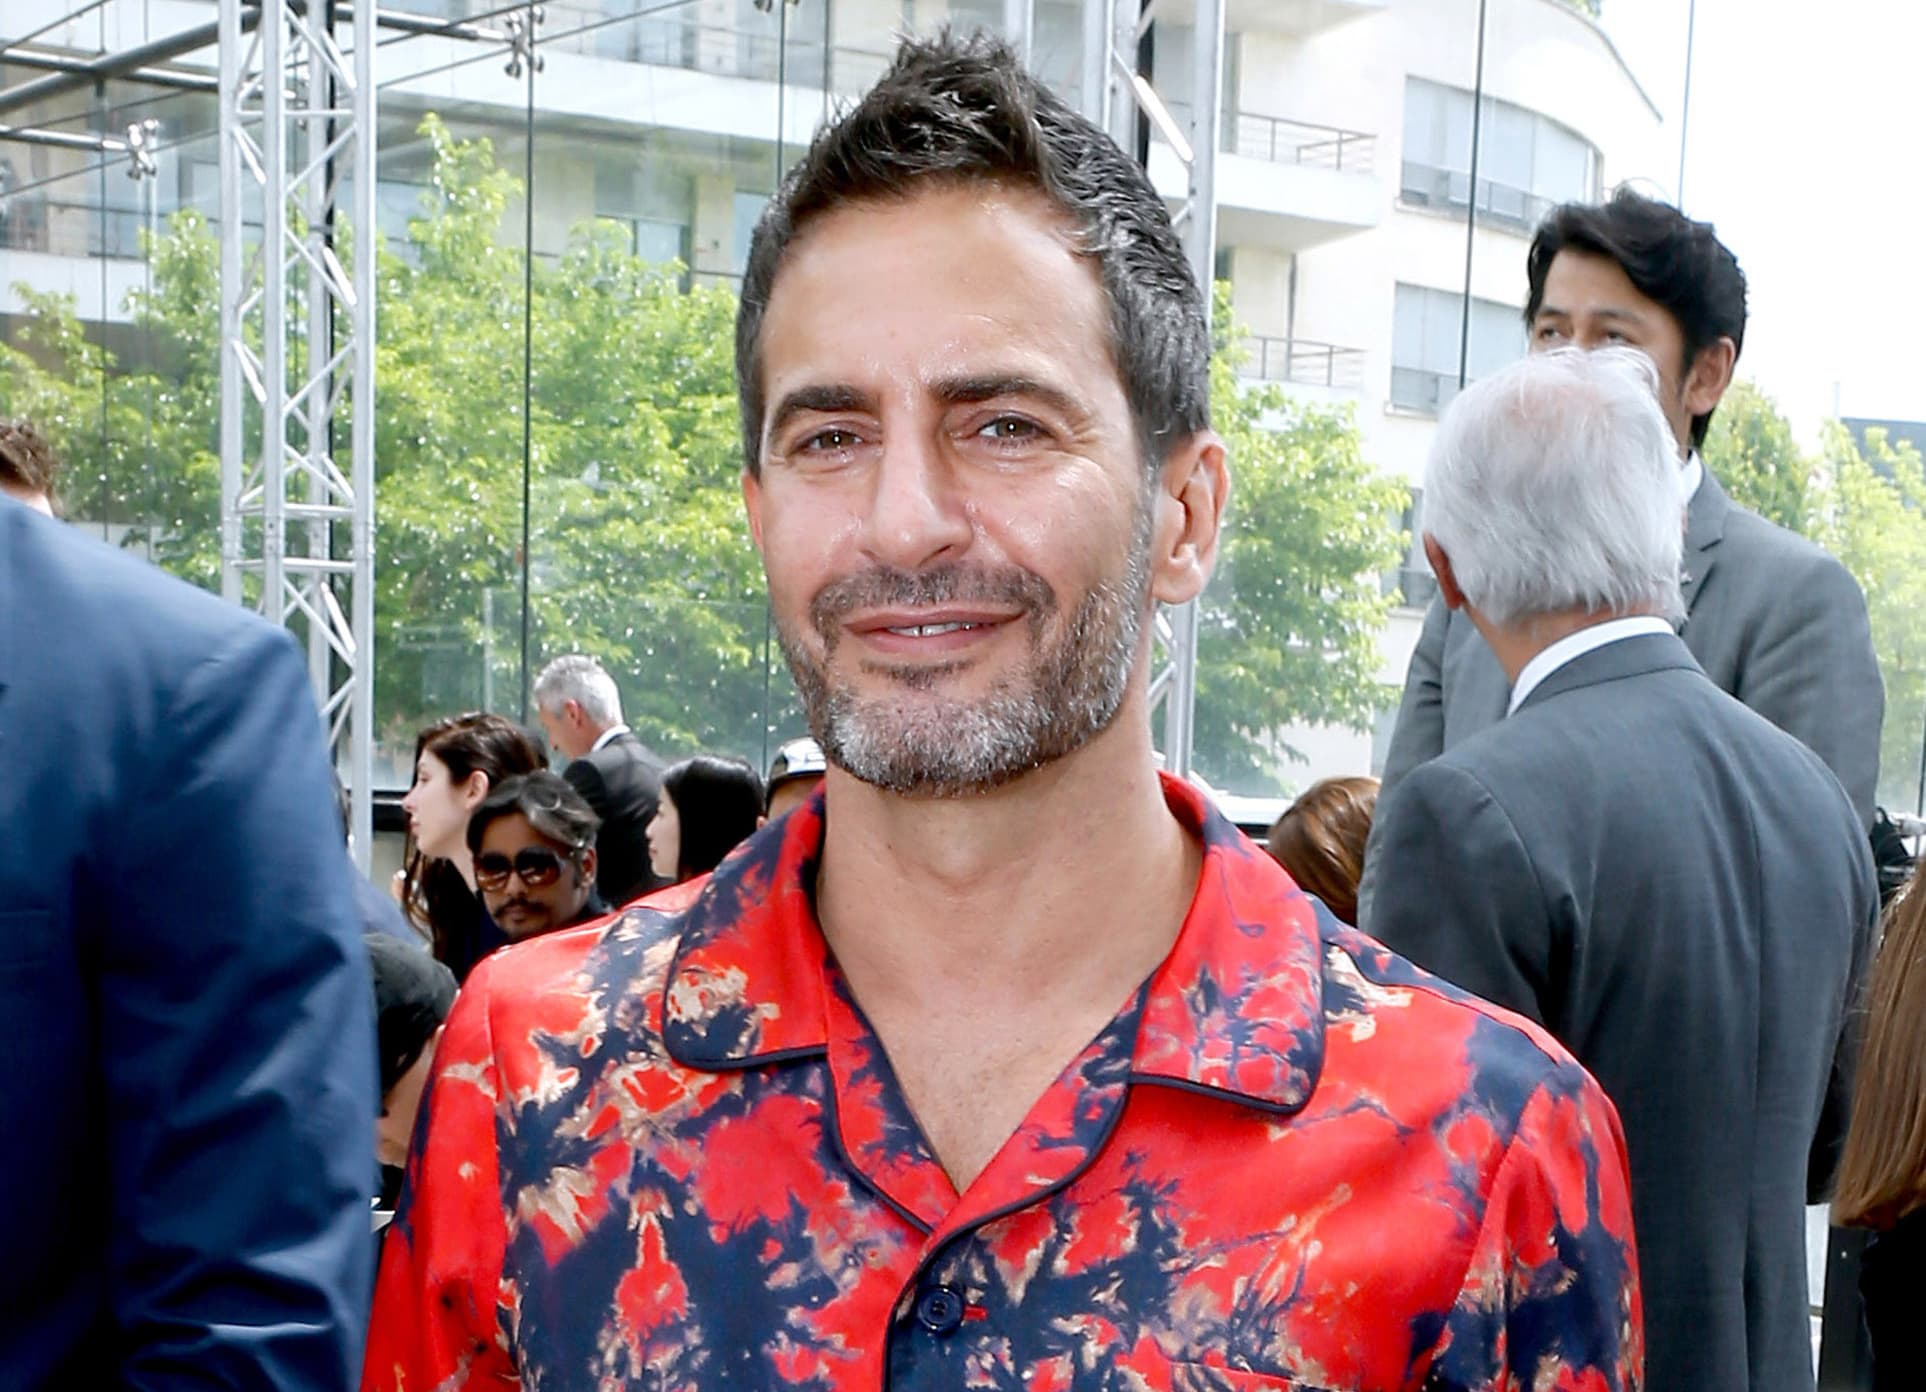 Marc Jacobs to Leave Louis Vuitton - The New York Times